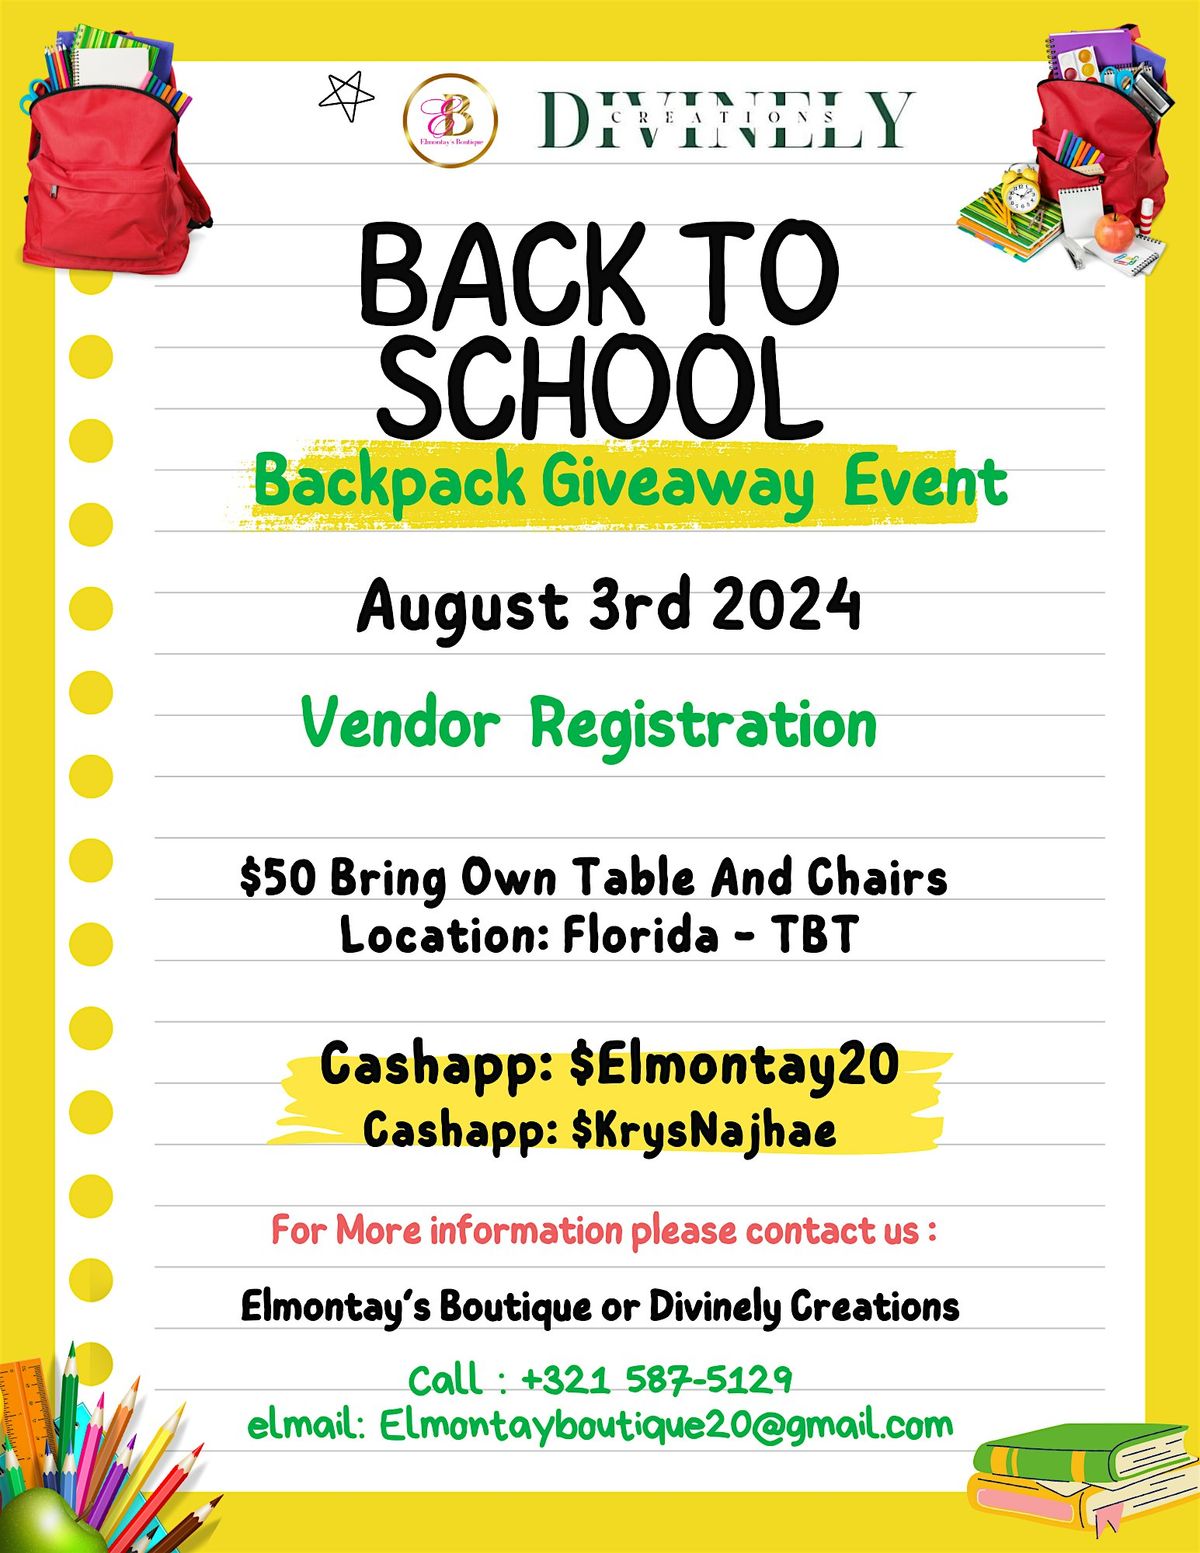 Backpack Giveaway Event